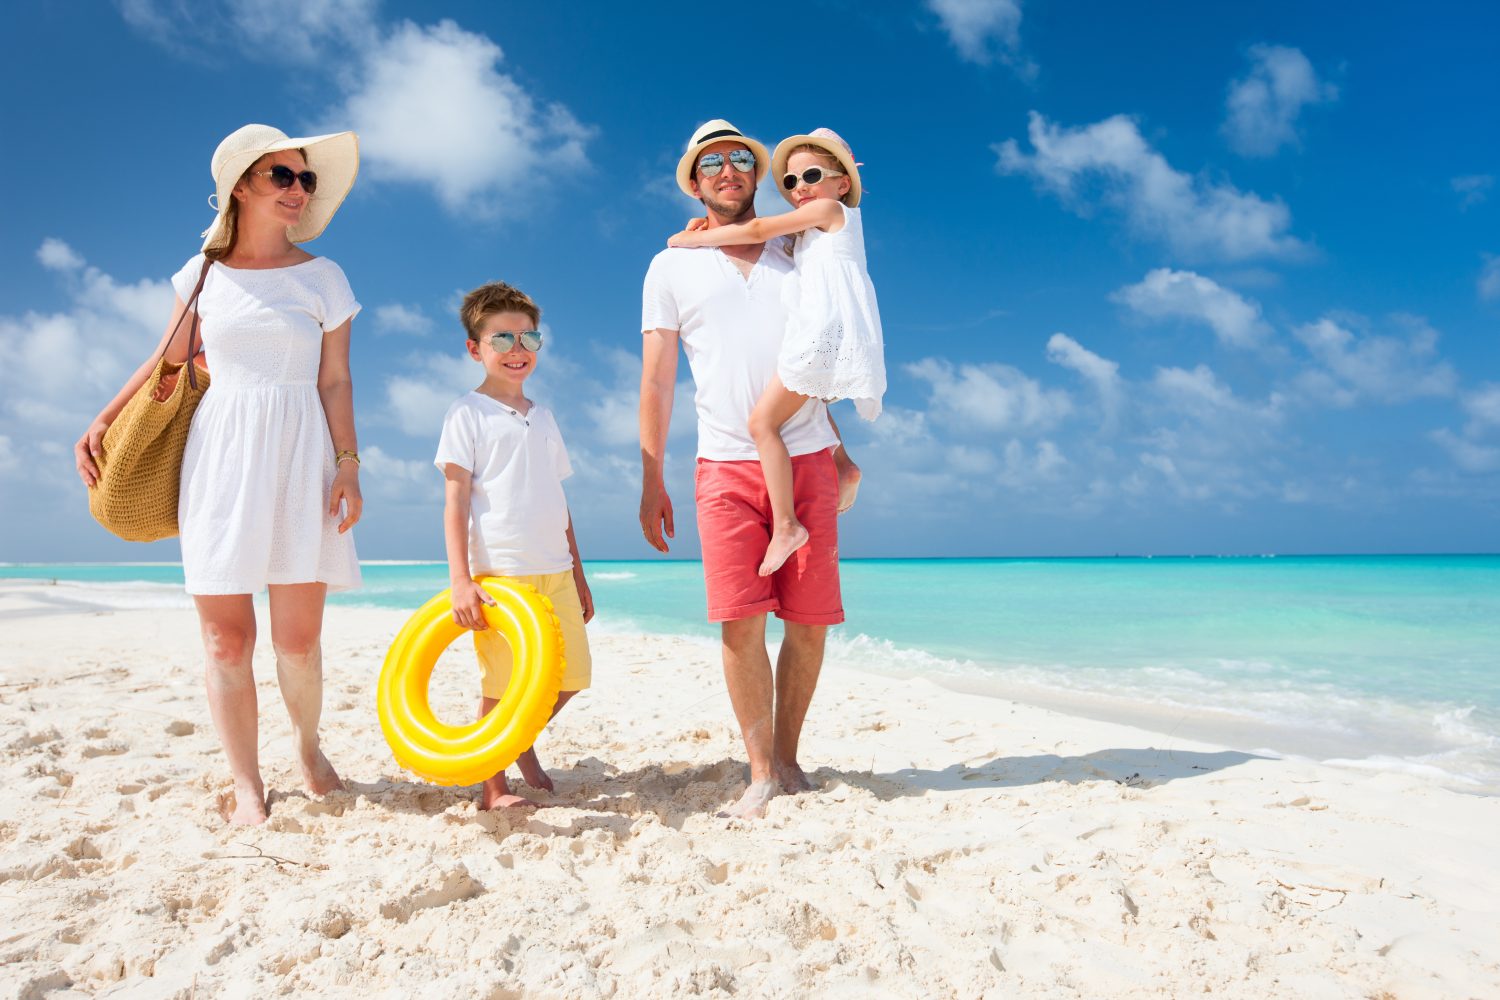 Top 5 Activities for a Gold Coast Family Holiday